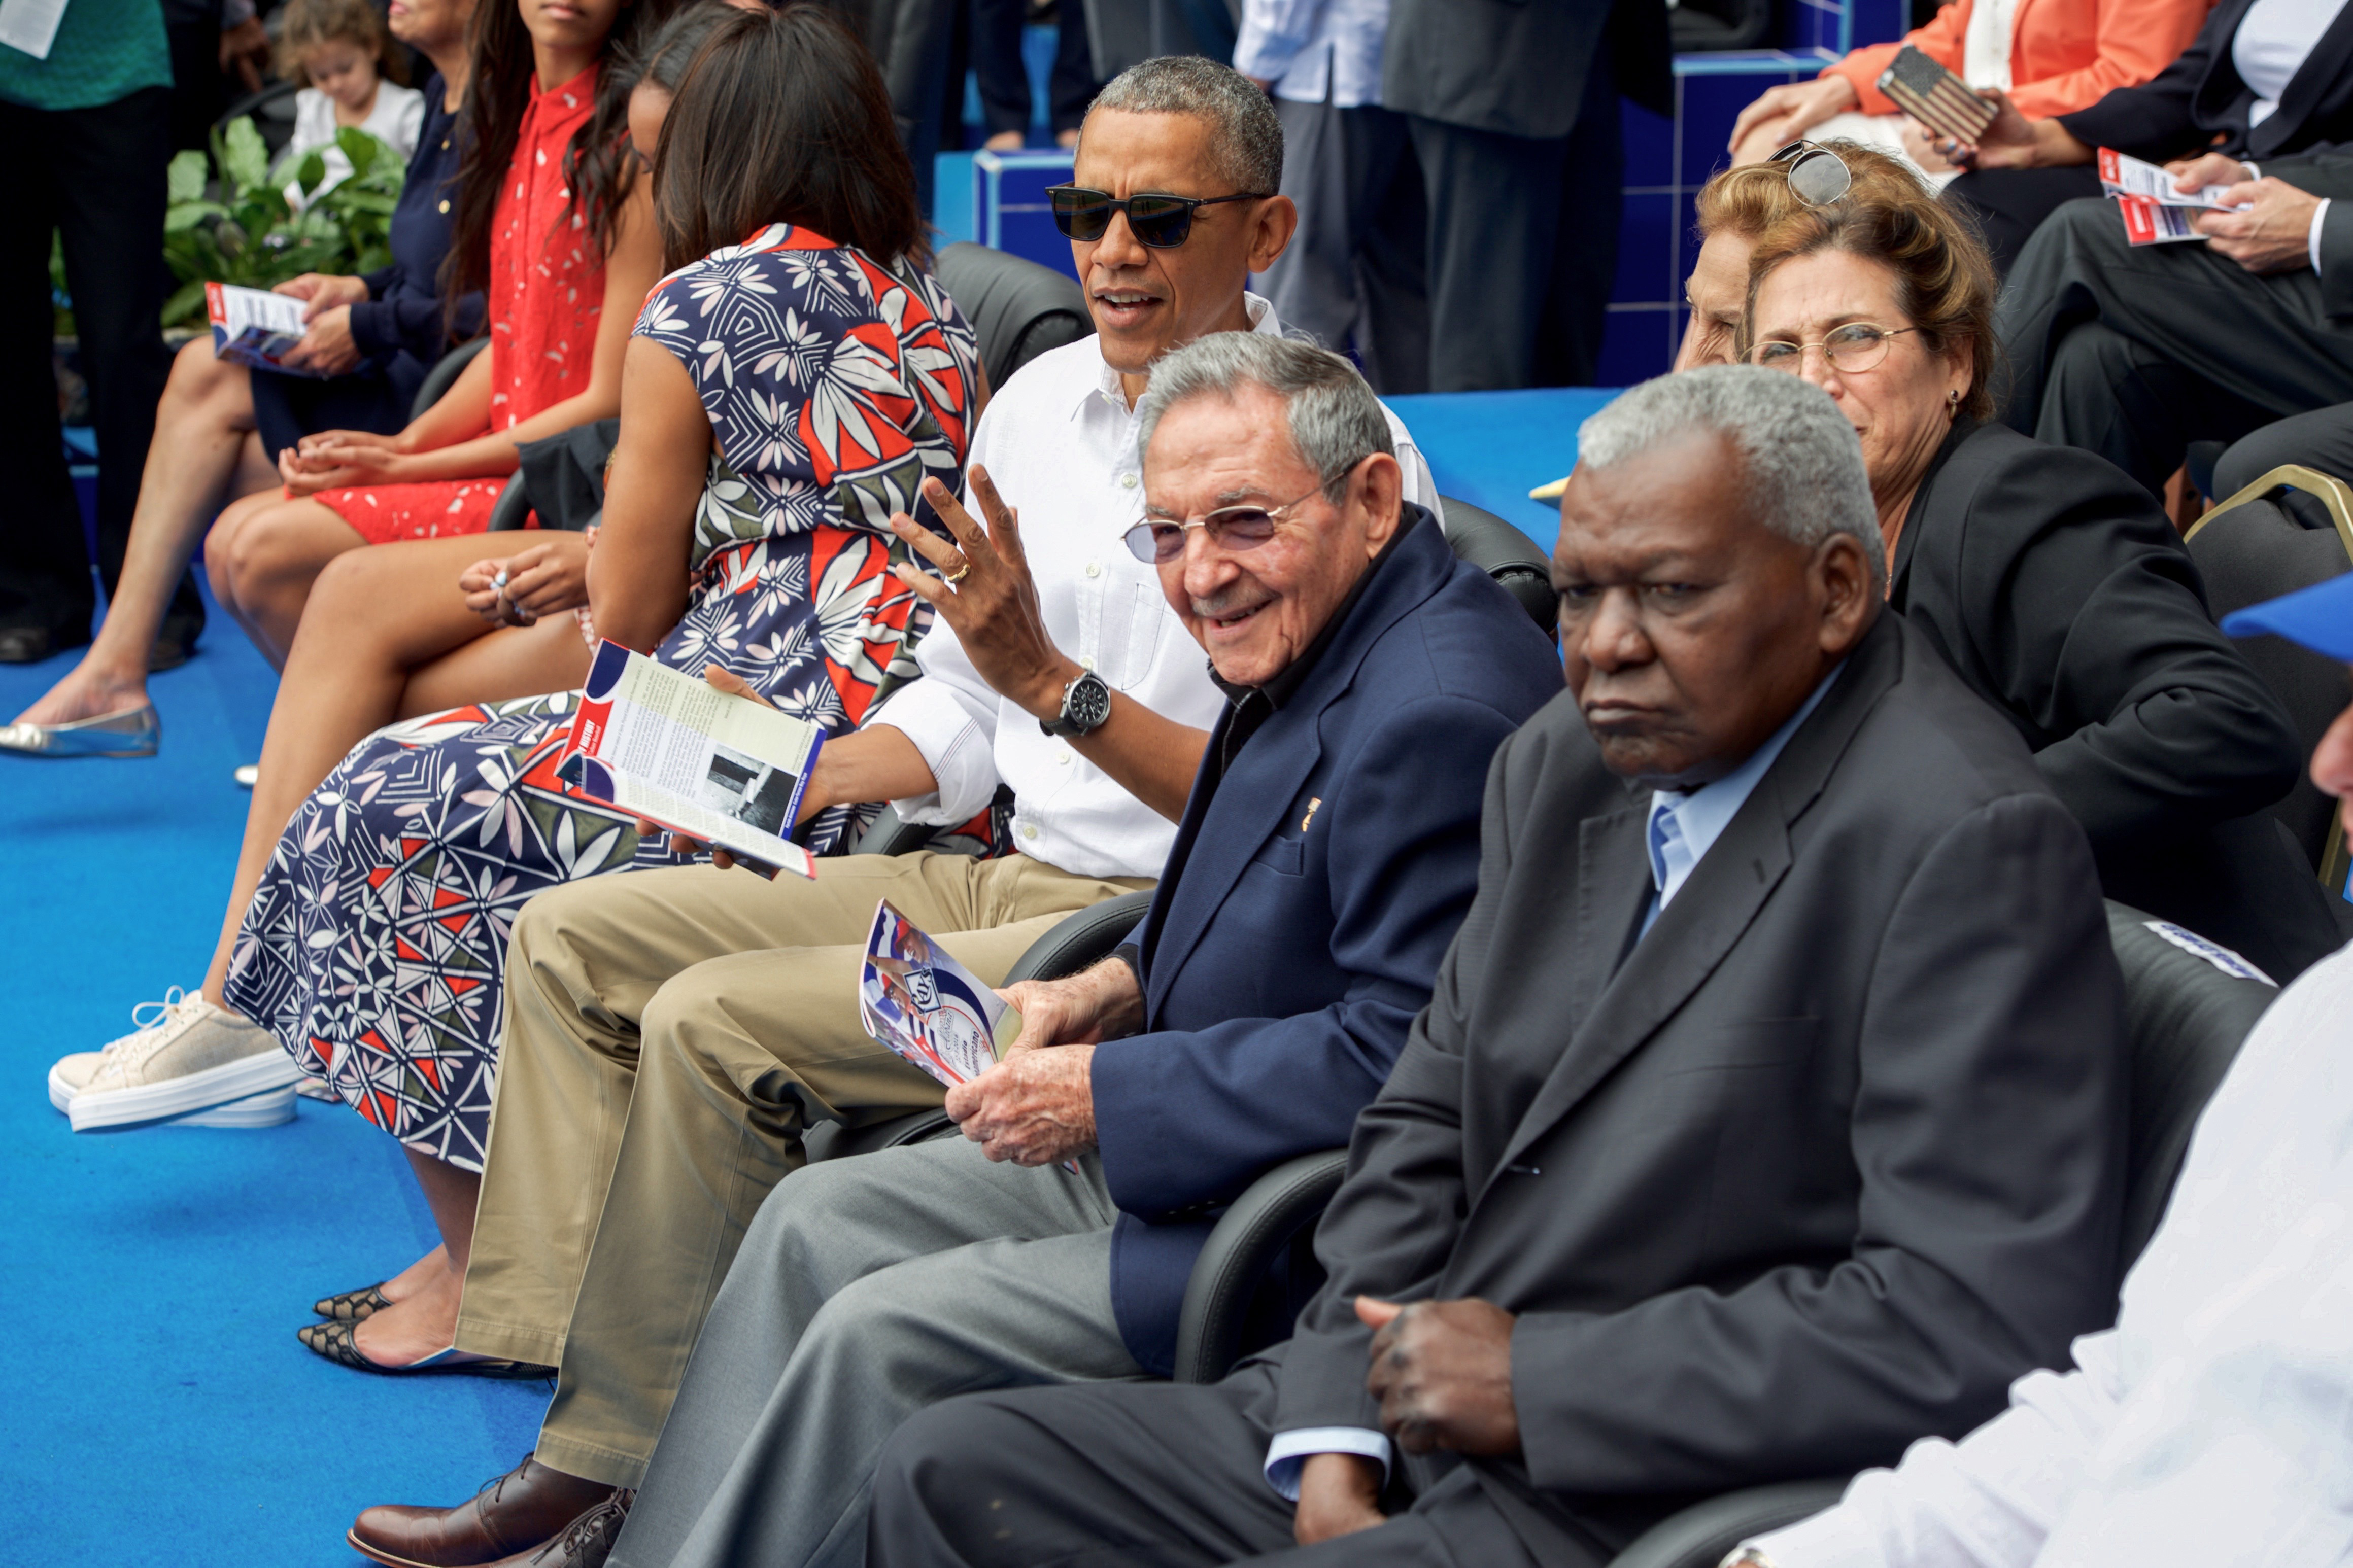 President Obama With Cuban President Castro at Estadio Latinoamericano in Havana, Cuba U.S. President Barack Obama sits with Cuban President Raul Castro at the Estadio Latinoamericano in Havana, Cuba, as he members of a U.S. delegation including U.S. Secretary of State John Kerry attend an exhibition game on March 22, 2016, between the Cuban National Baseball Team and the Tampa Bay Rays. [State Department photo/ Public Domain]